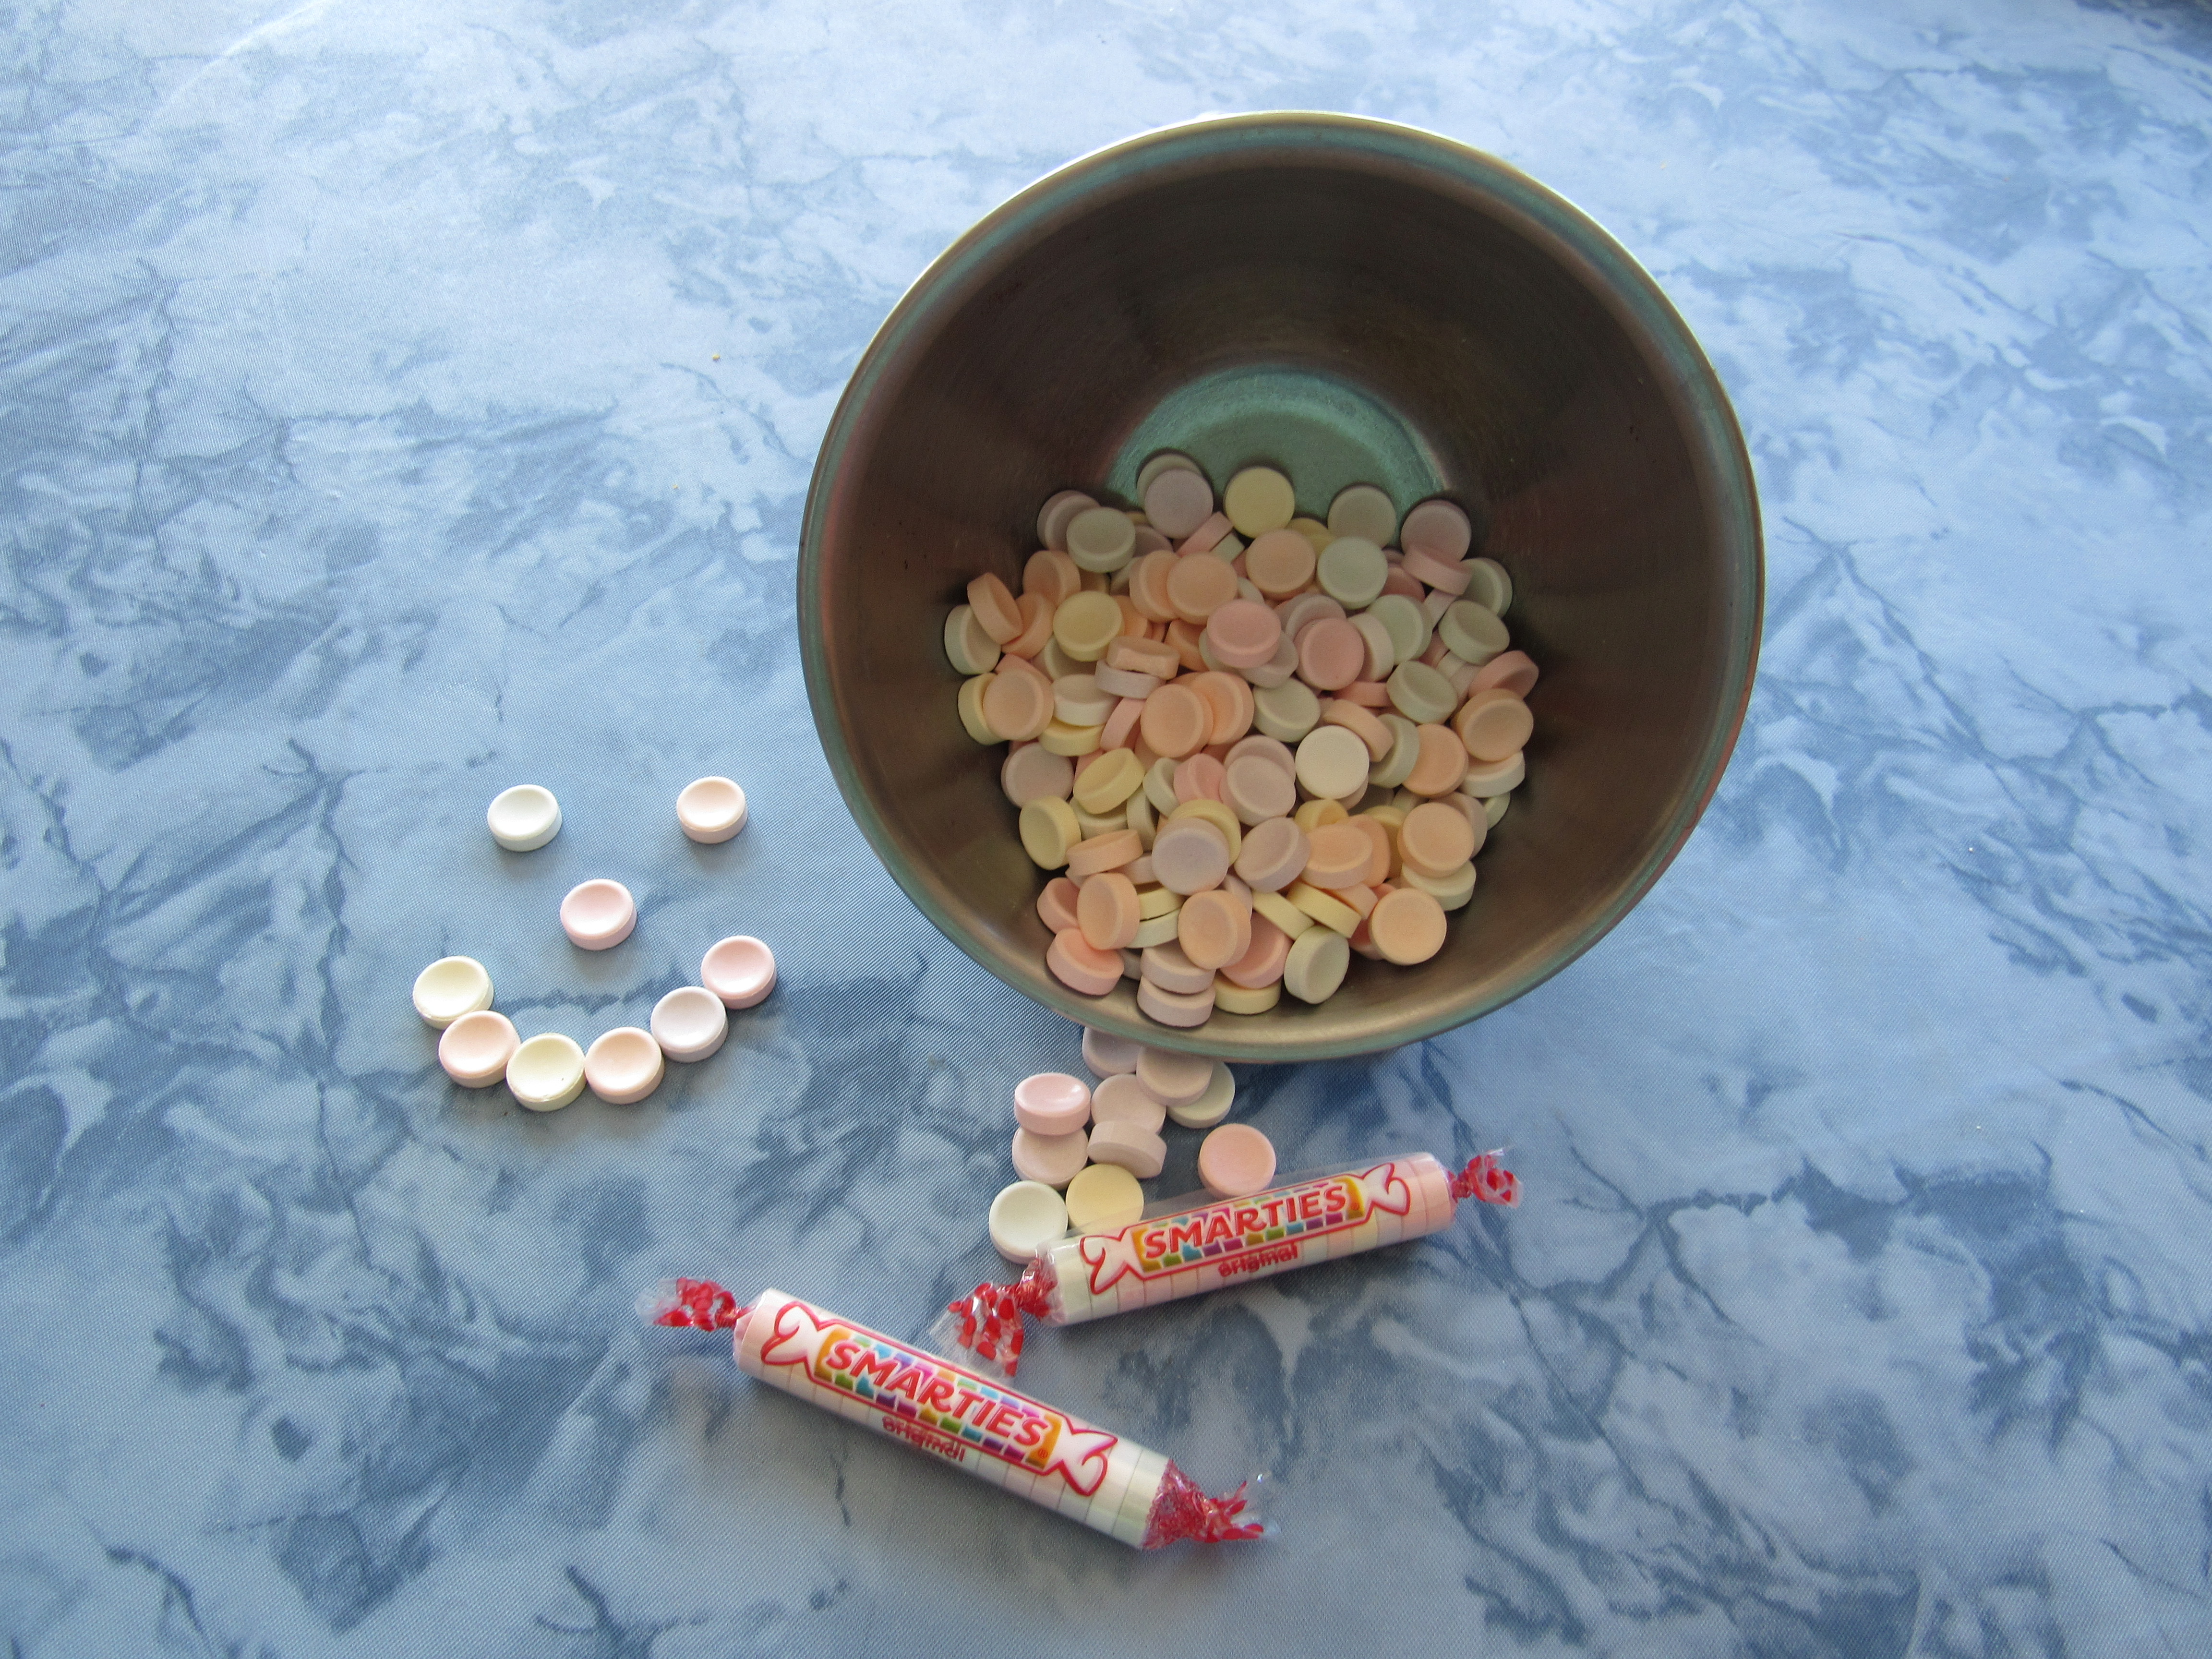 Picture of Smarties candies as used in the activity